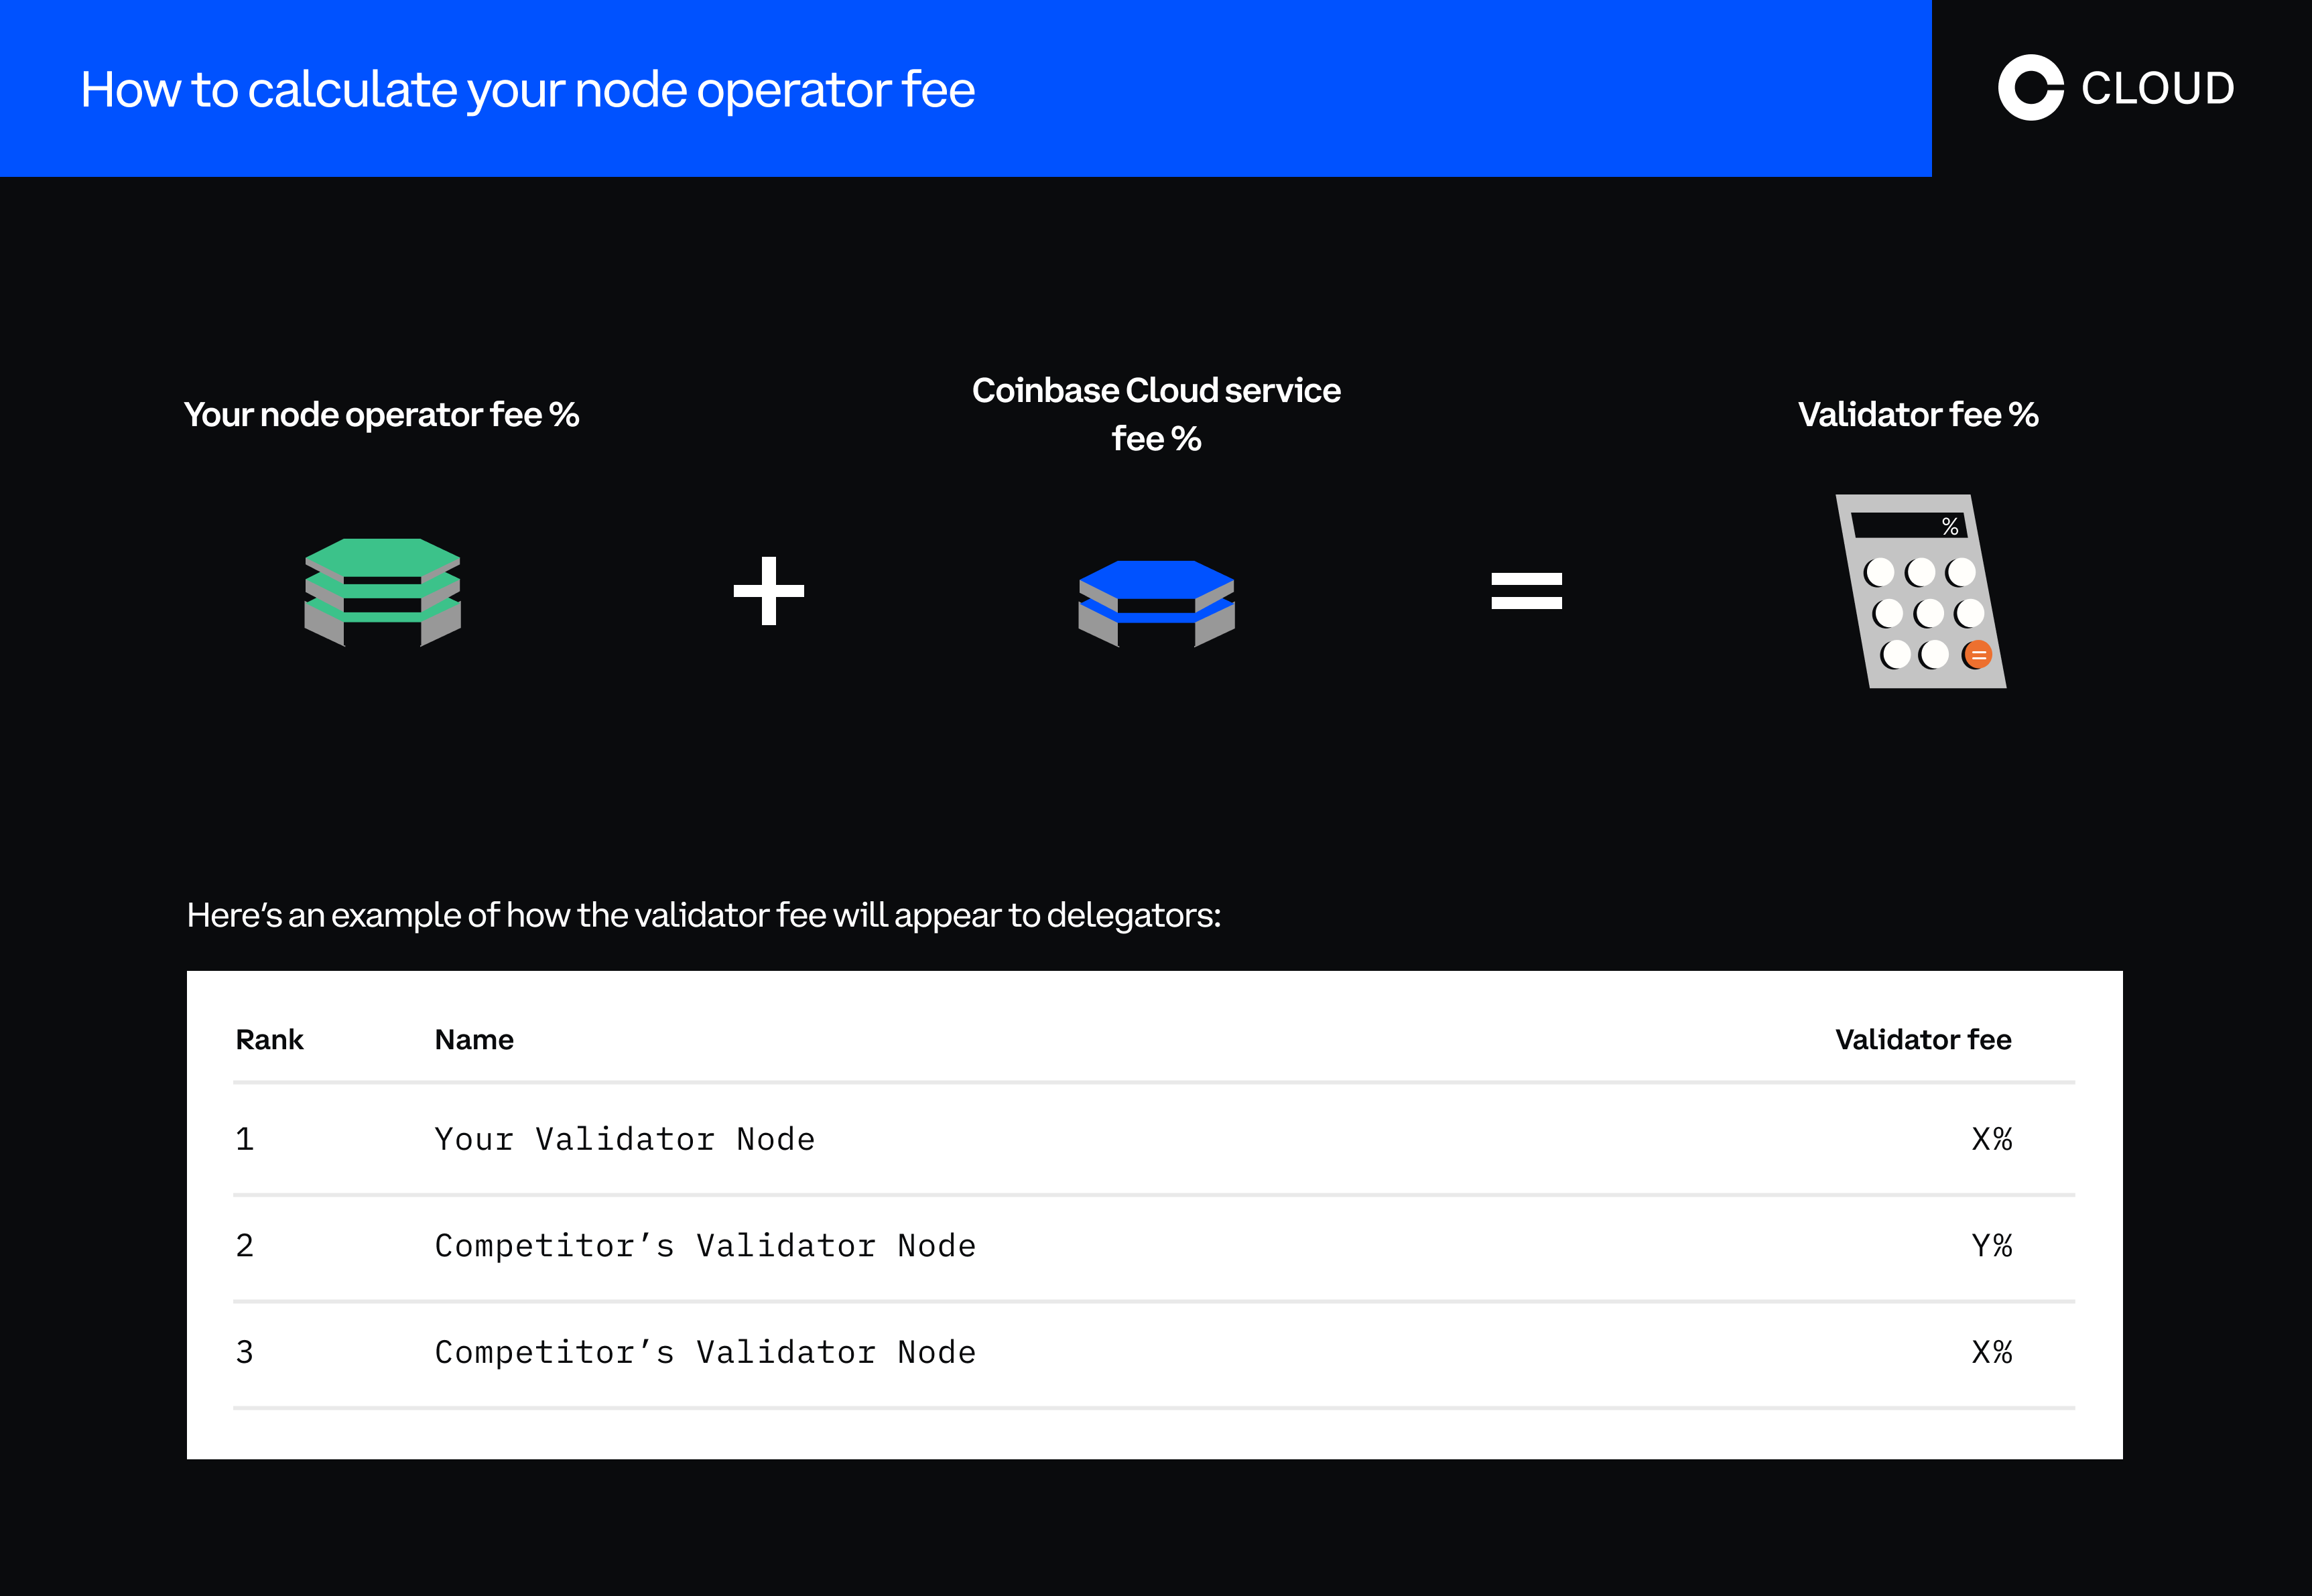 Image showing how to calculate a node operator fee. Image shows your node operator fee % + Coinbase Cloud service fee % = Validator fee %. Image also shows an example of how validator fees appear to delegators when they're selecting a node to delegate to.